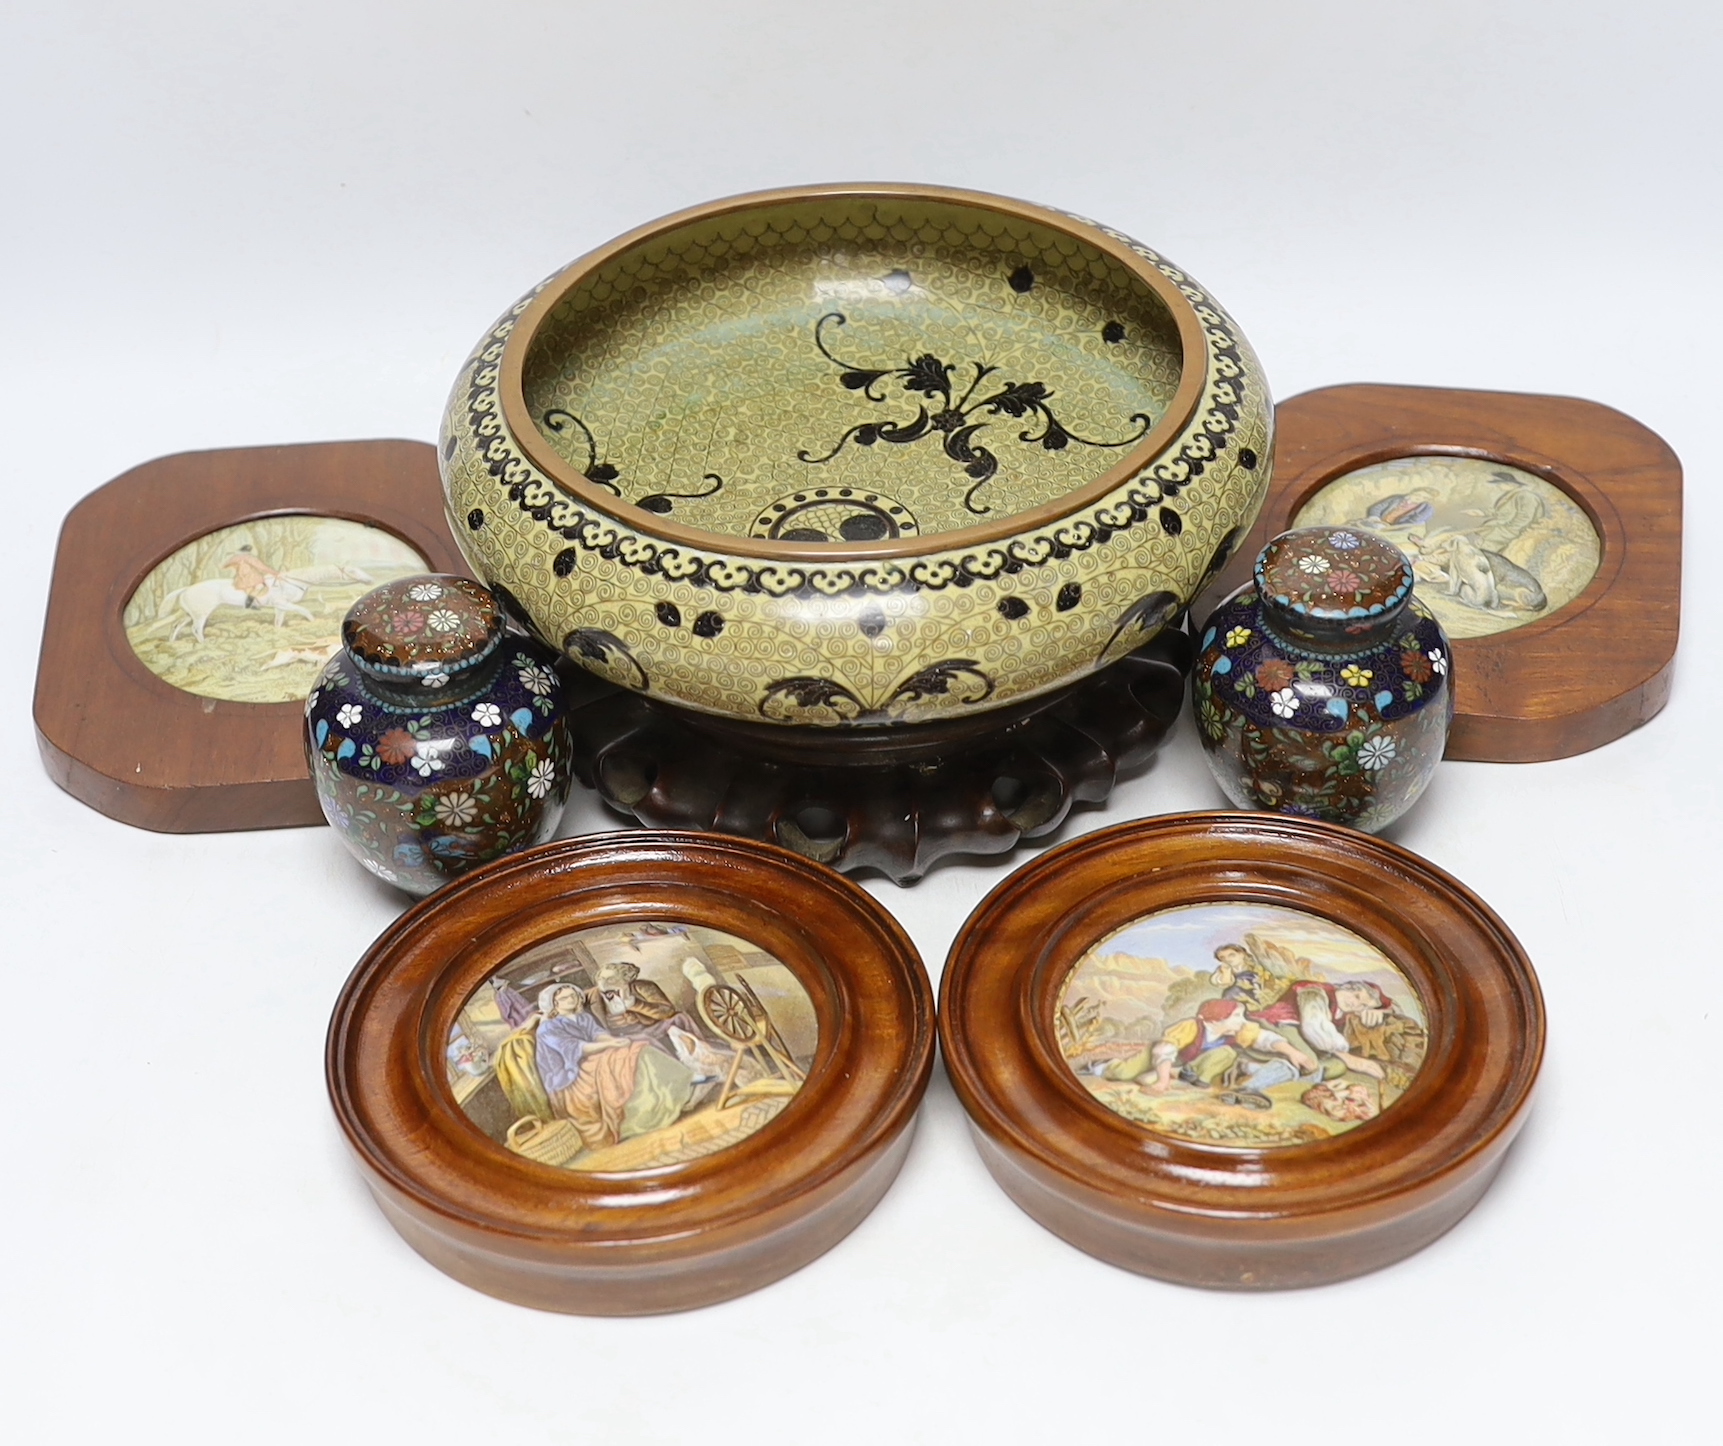 A Chinese cloisonné enamel bowl on a wooden stand, a pair of cloisonné jars with covers, and four 19th century Prattware pot lids, largest 25cm in diameter